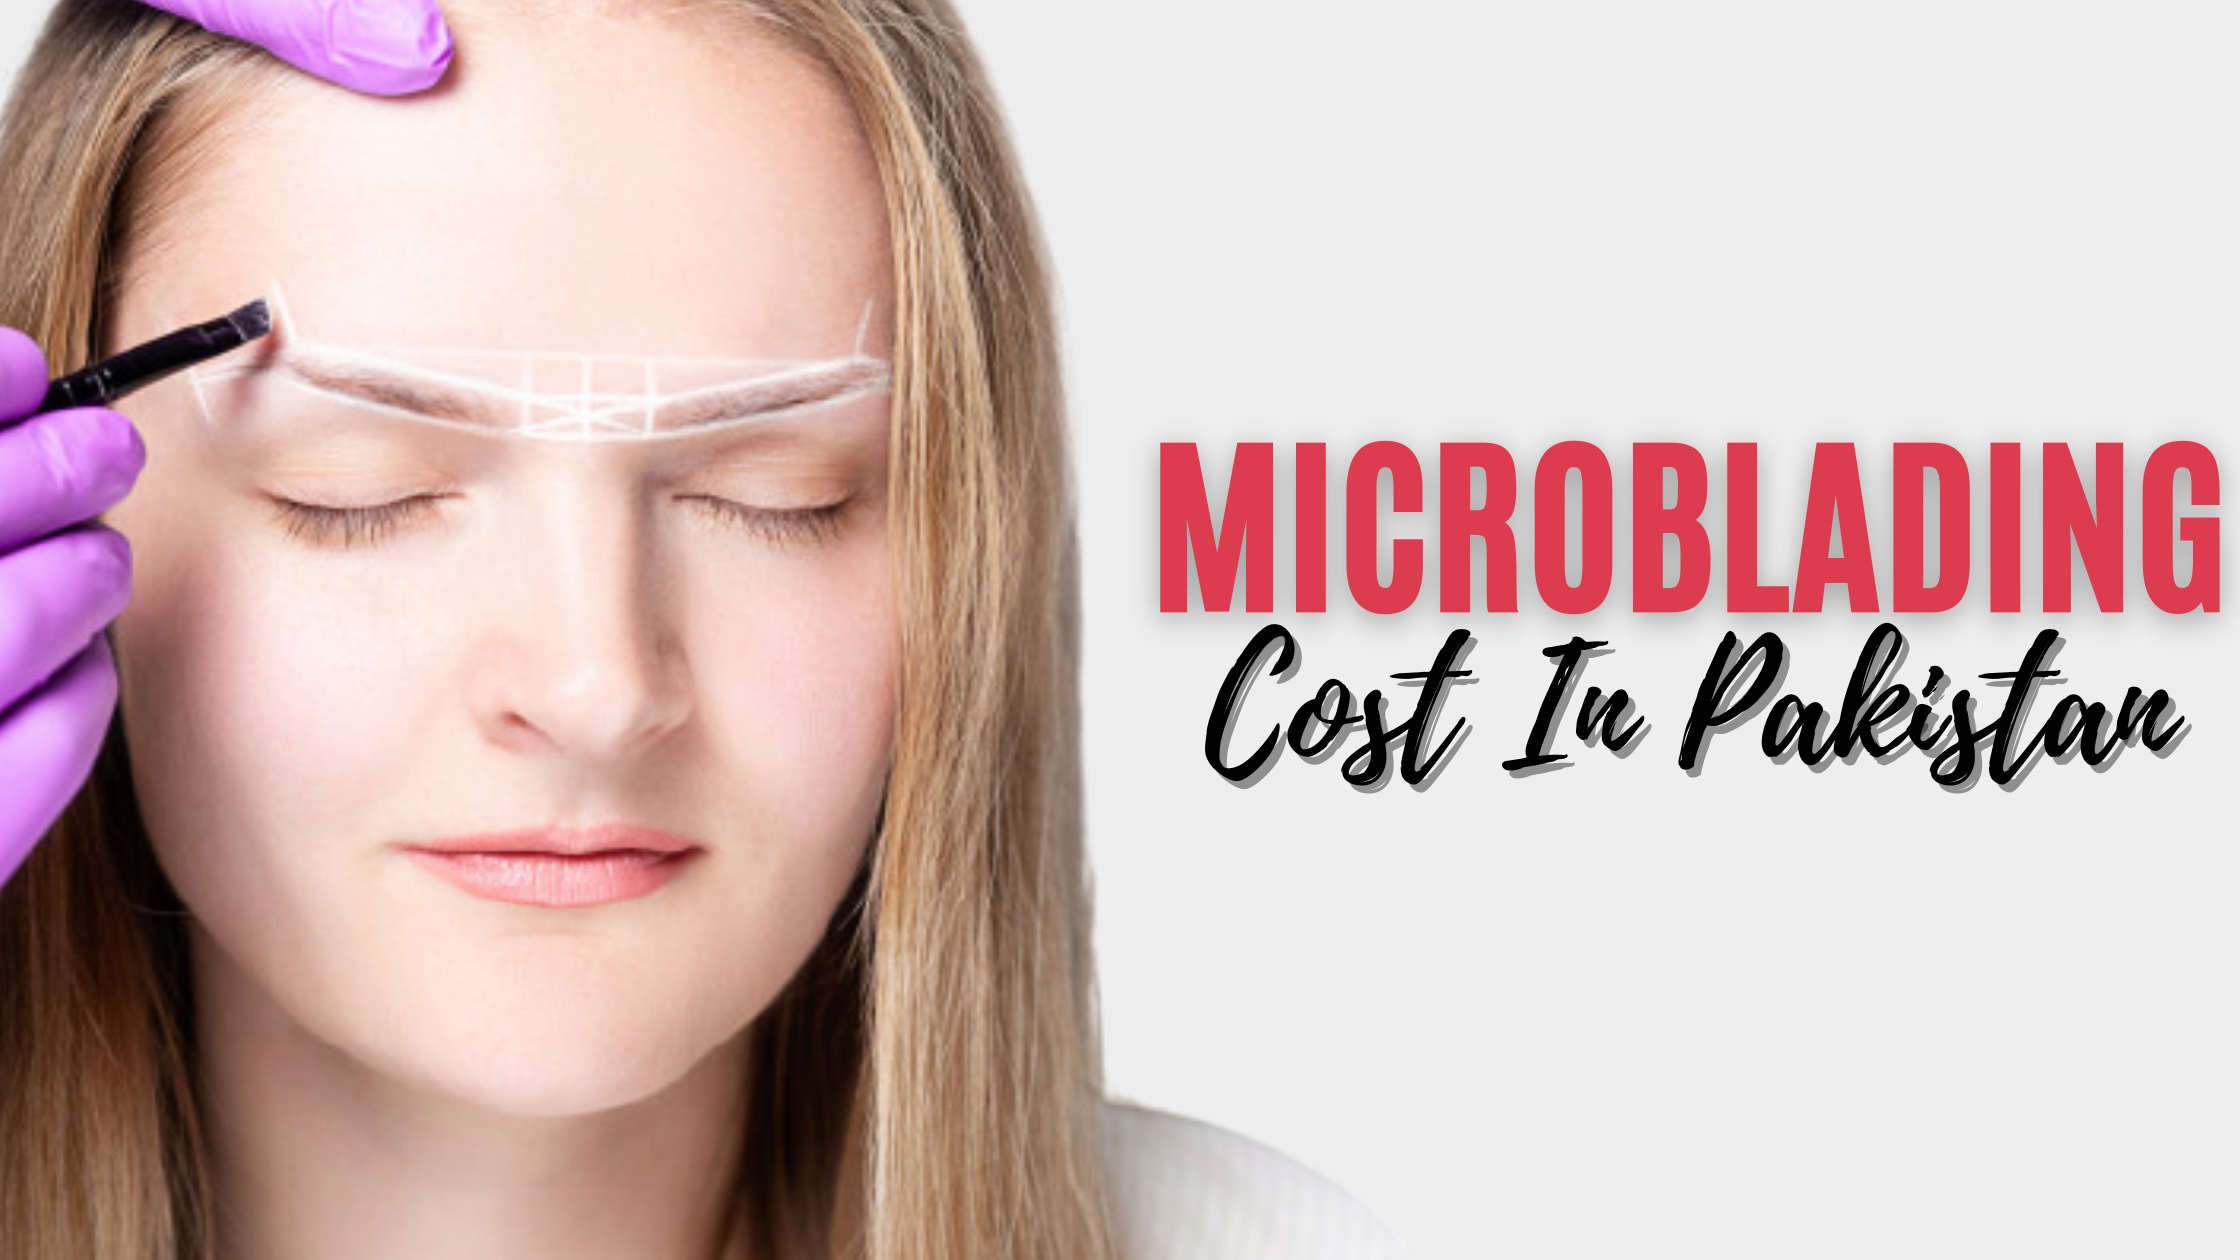 Microblading cost in Pakistan